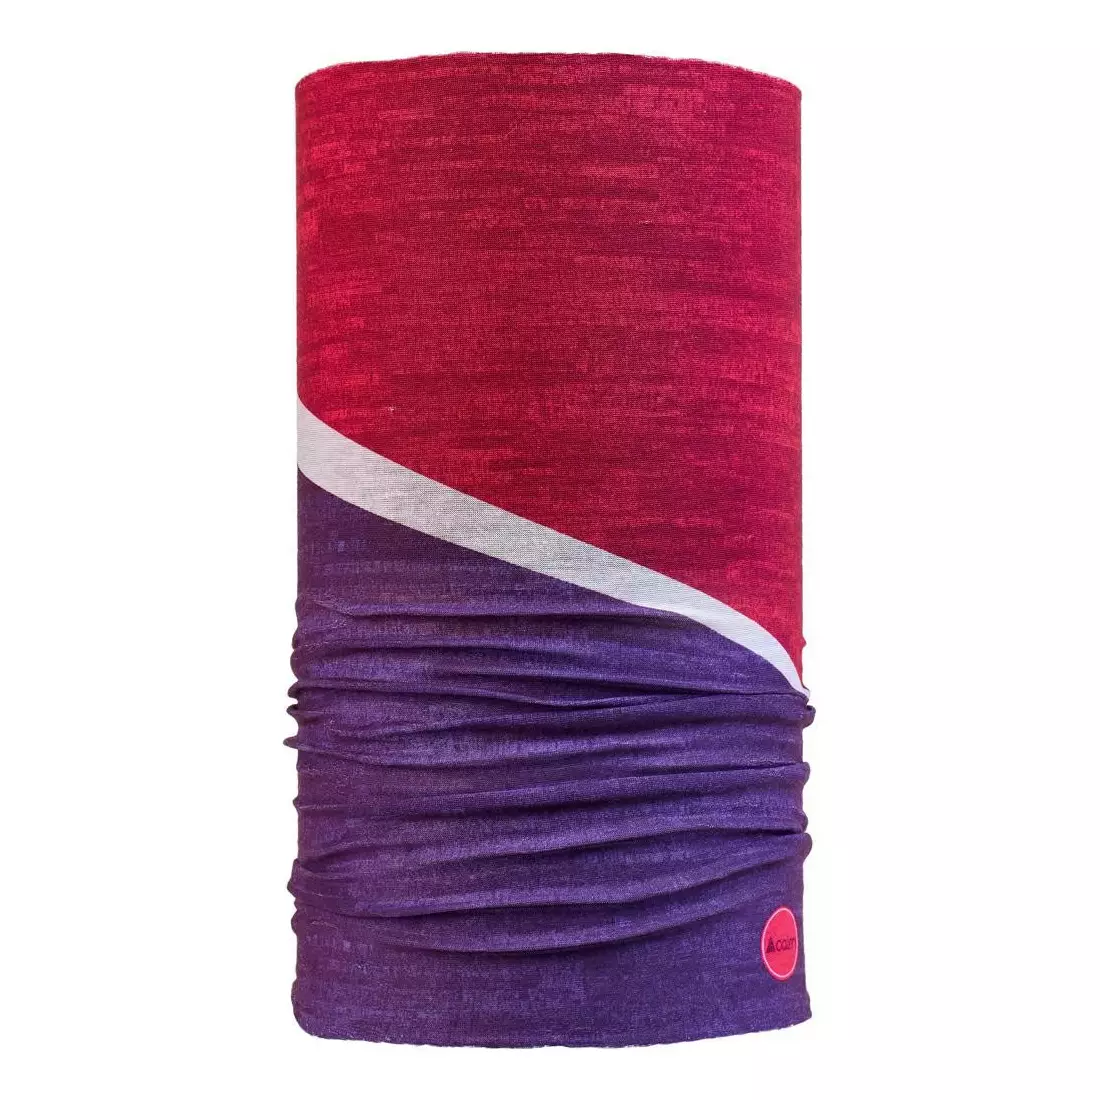 CAIRN Multifunctional scarf MALAWI TUBE red purple